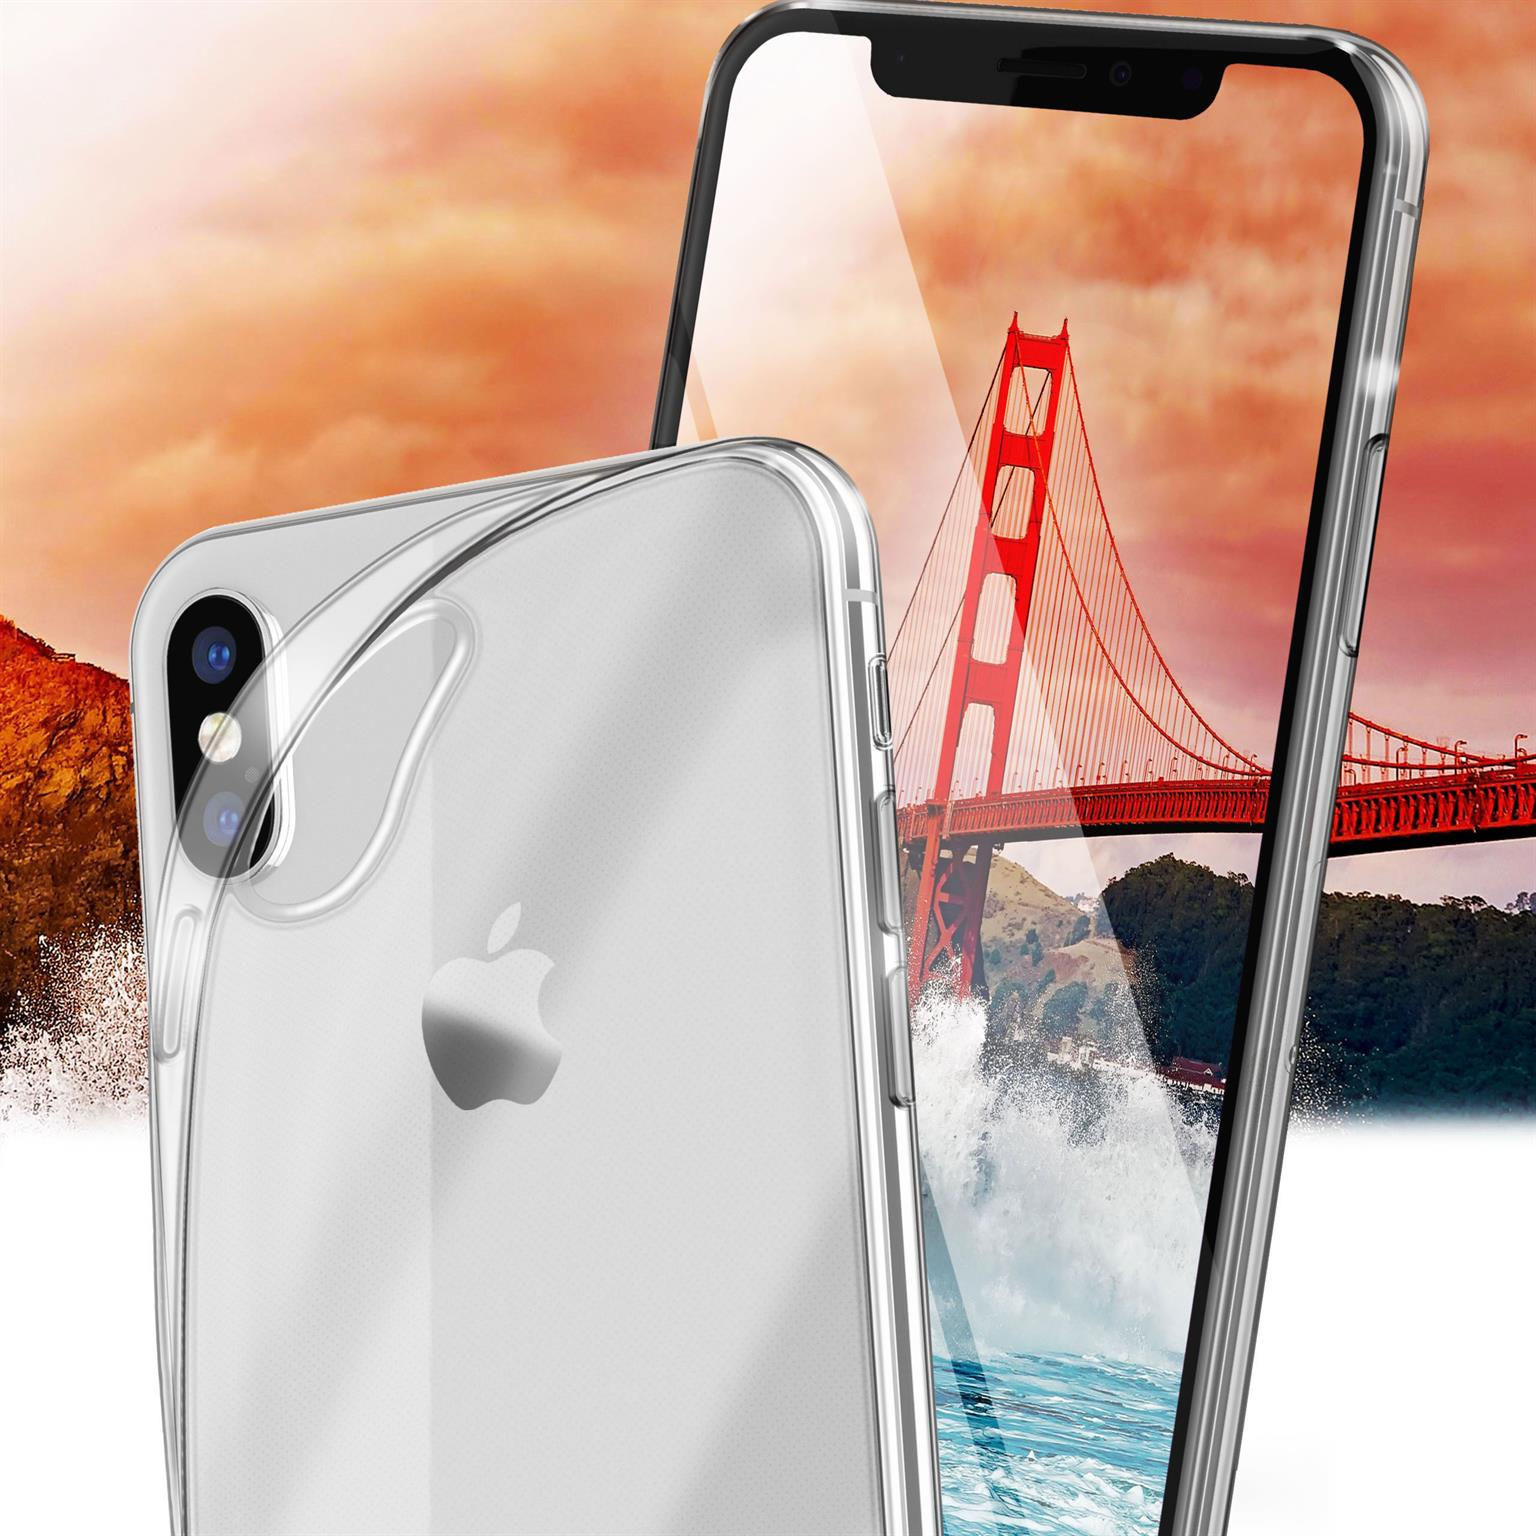 MOEX Aero Case, Crystal-Clear iPhone Apple, Backcover, XS Max